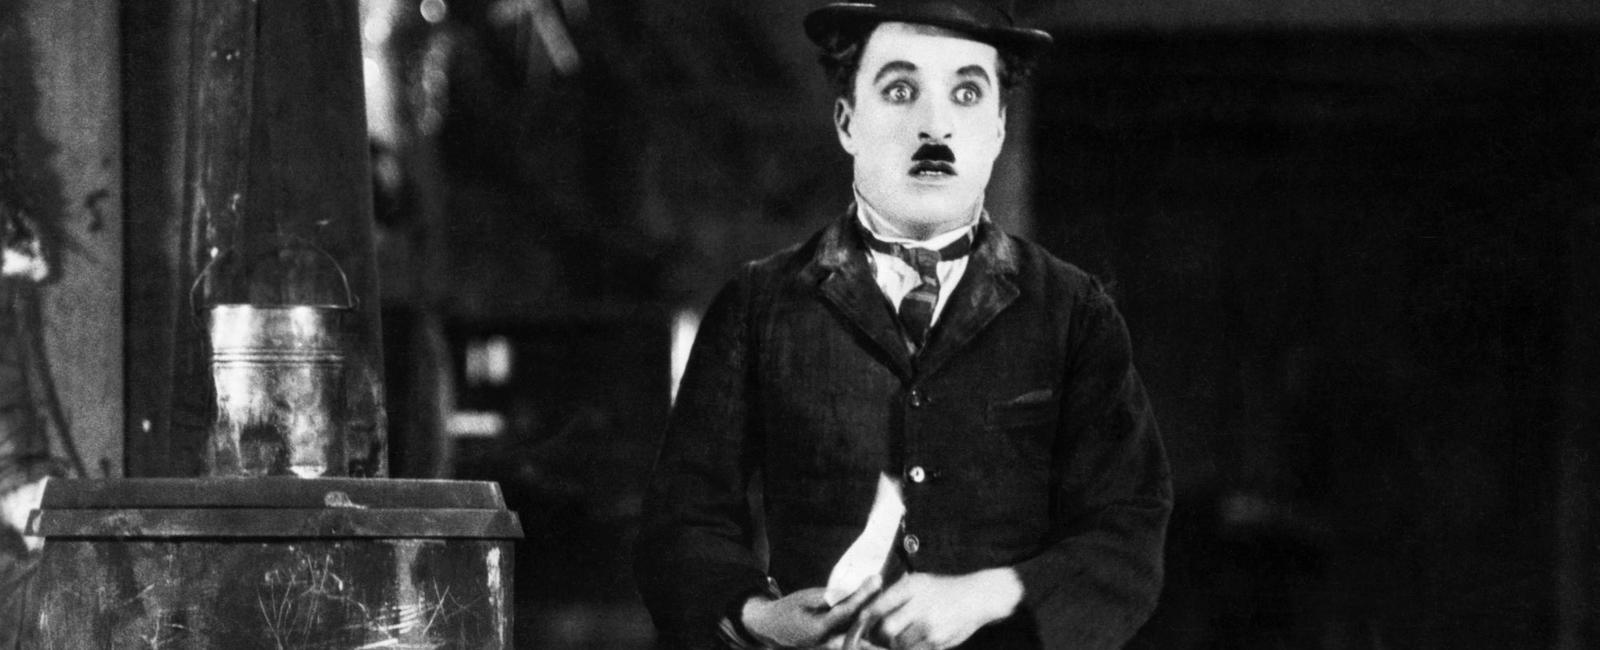 At the height of his popularity charlie chaplin entered a charlie chaplin look a like competition in san francisco he came in 20th place